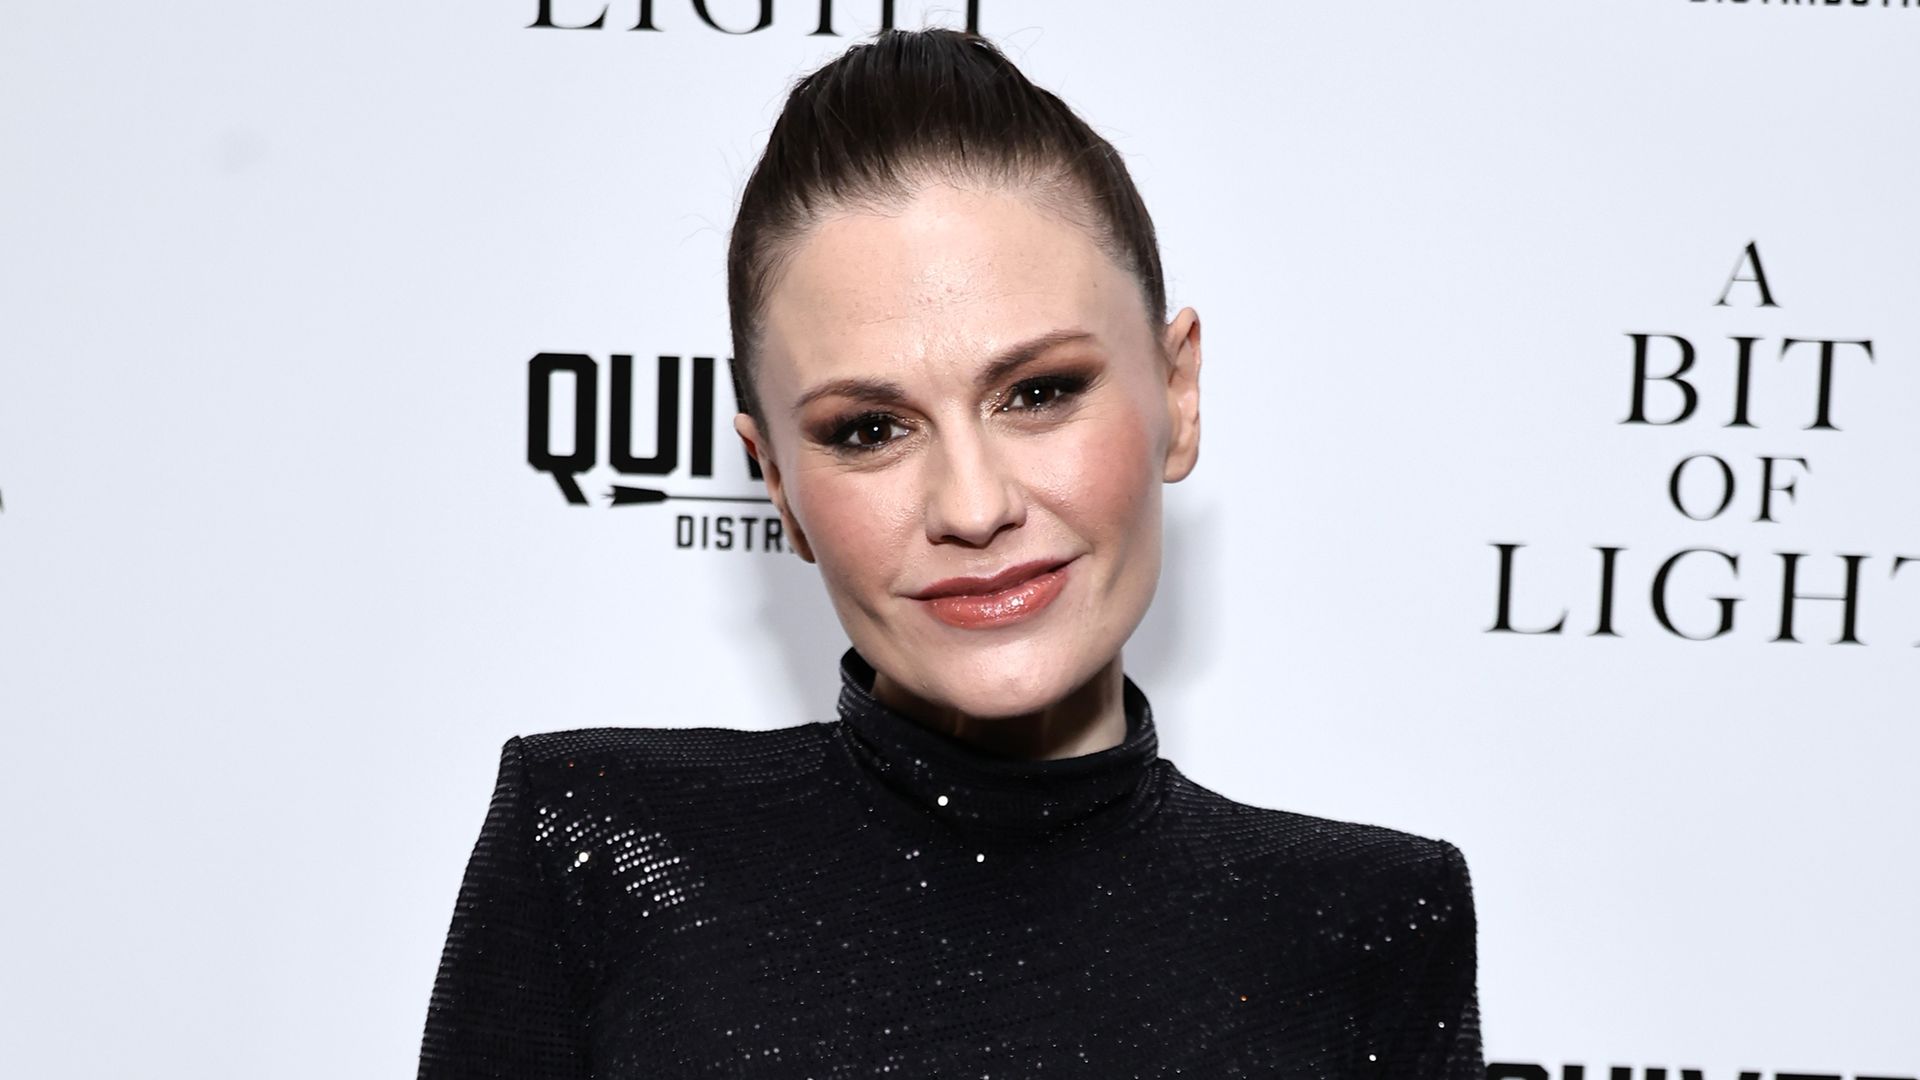 Anna Paquin speaks out after revealing 'difficult' health issues affecting her mobility